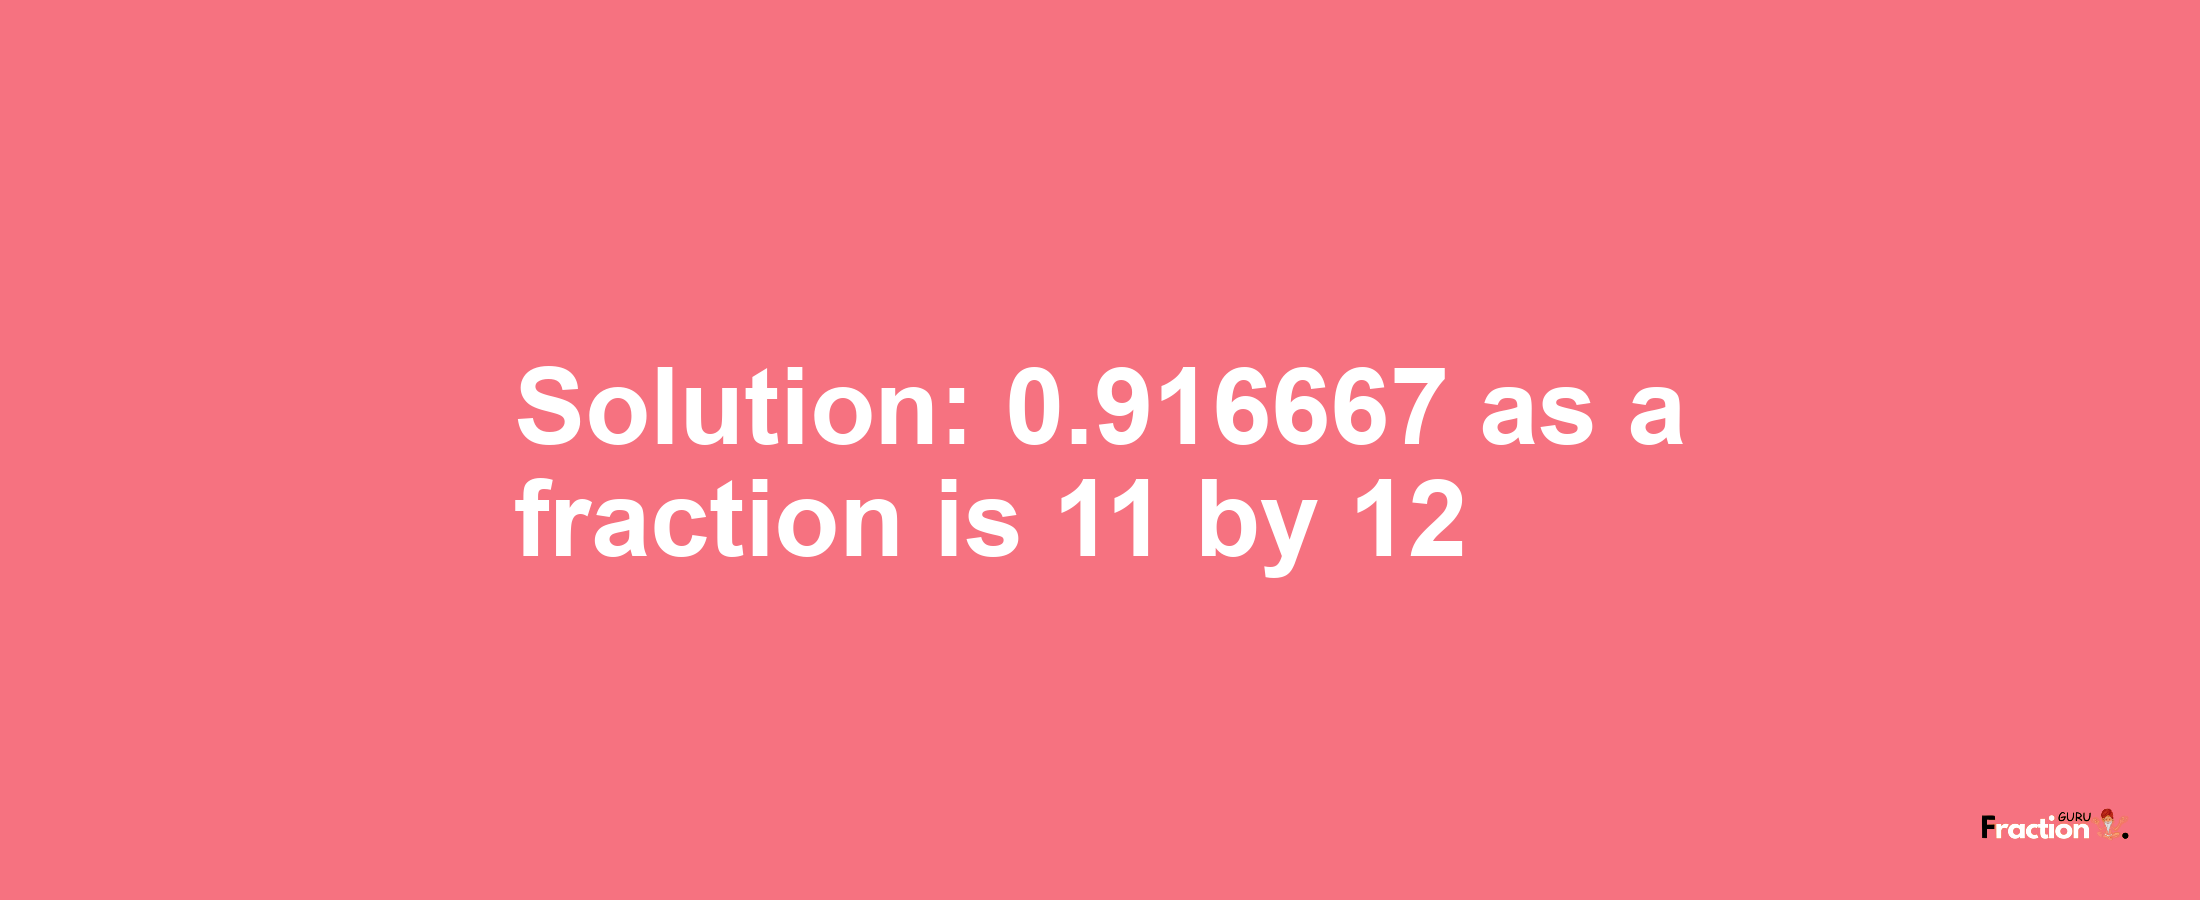 Solution:0.916667 as a fraction is 11/12